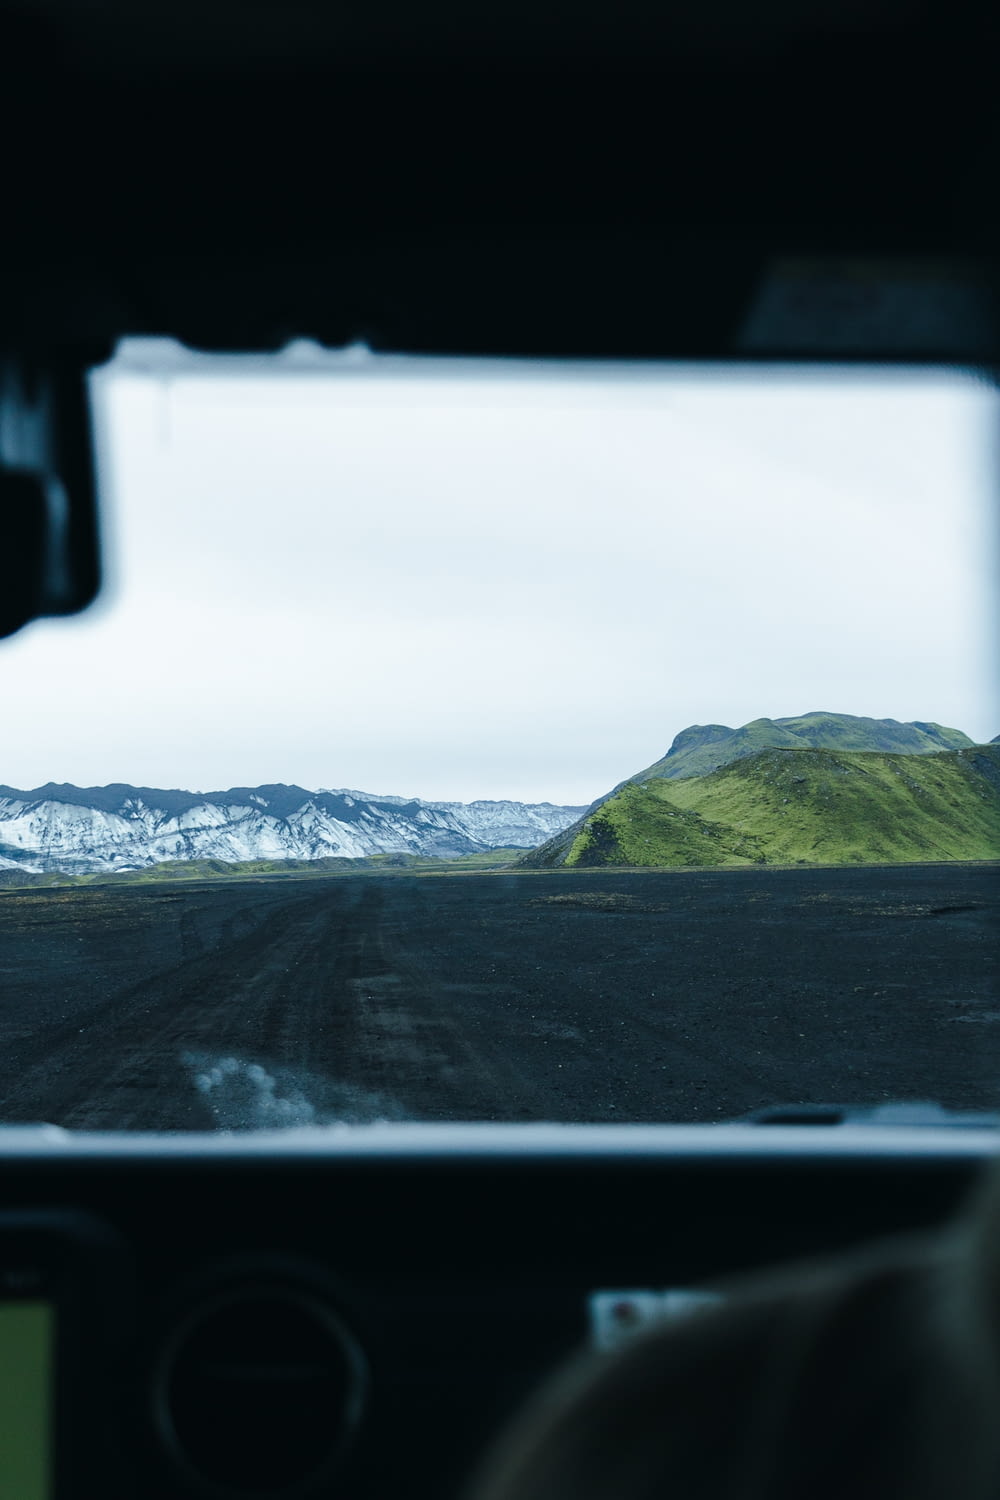 a view from inside a vehicle of a mountain range